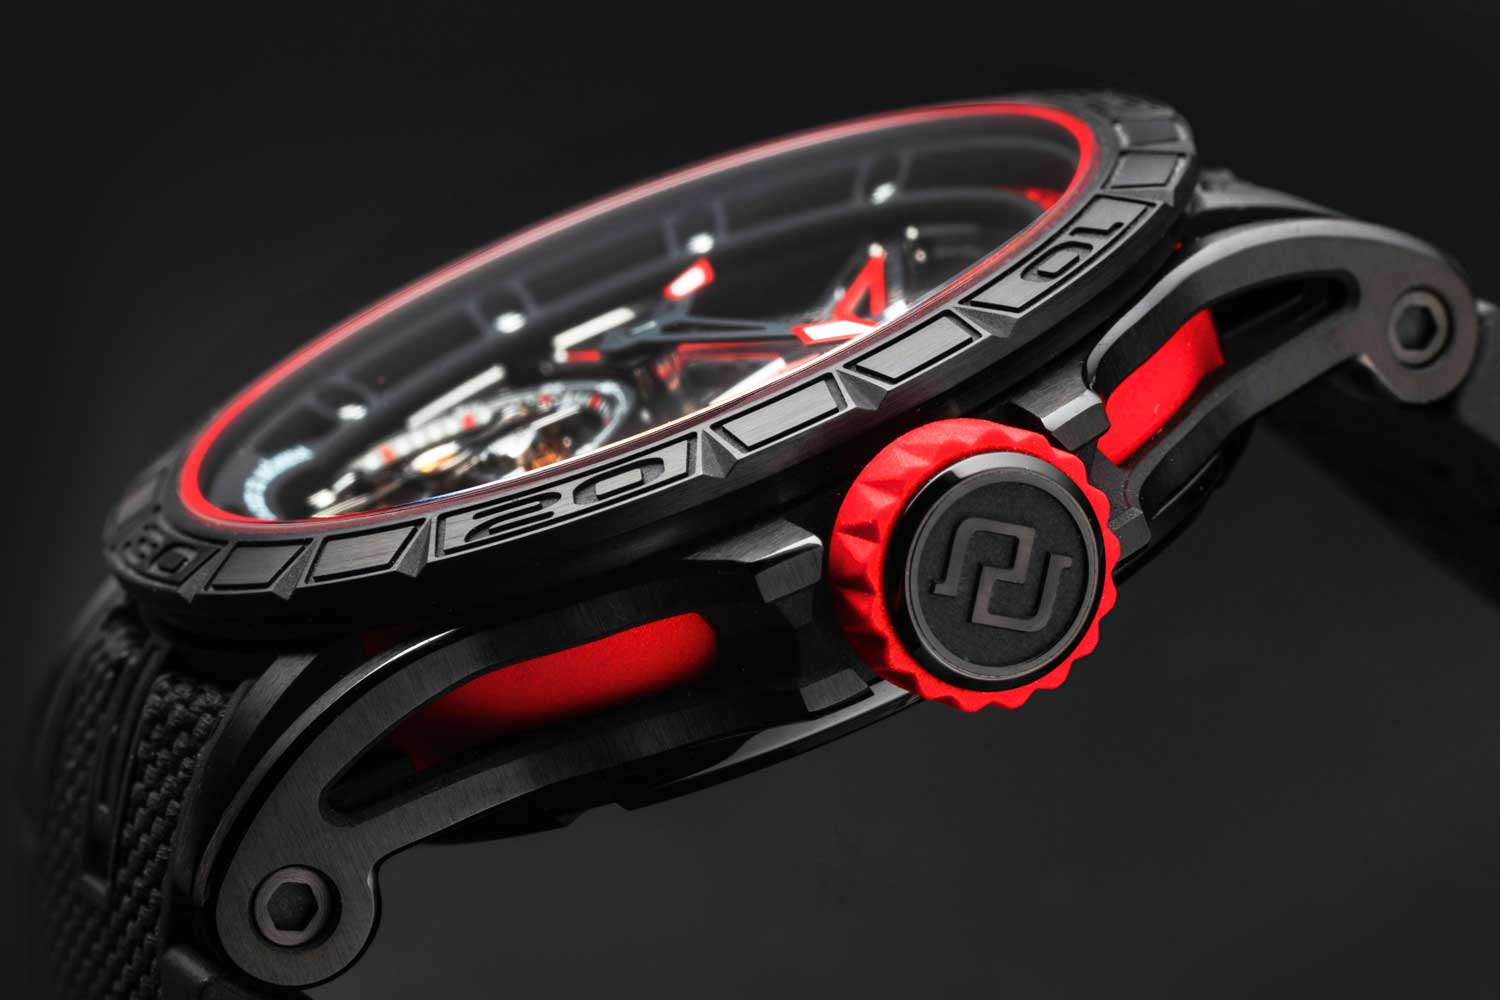 The new Excalibur Spider Pirelli also offers a quick interchangeable strap feature